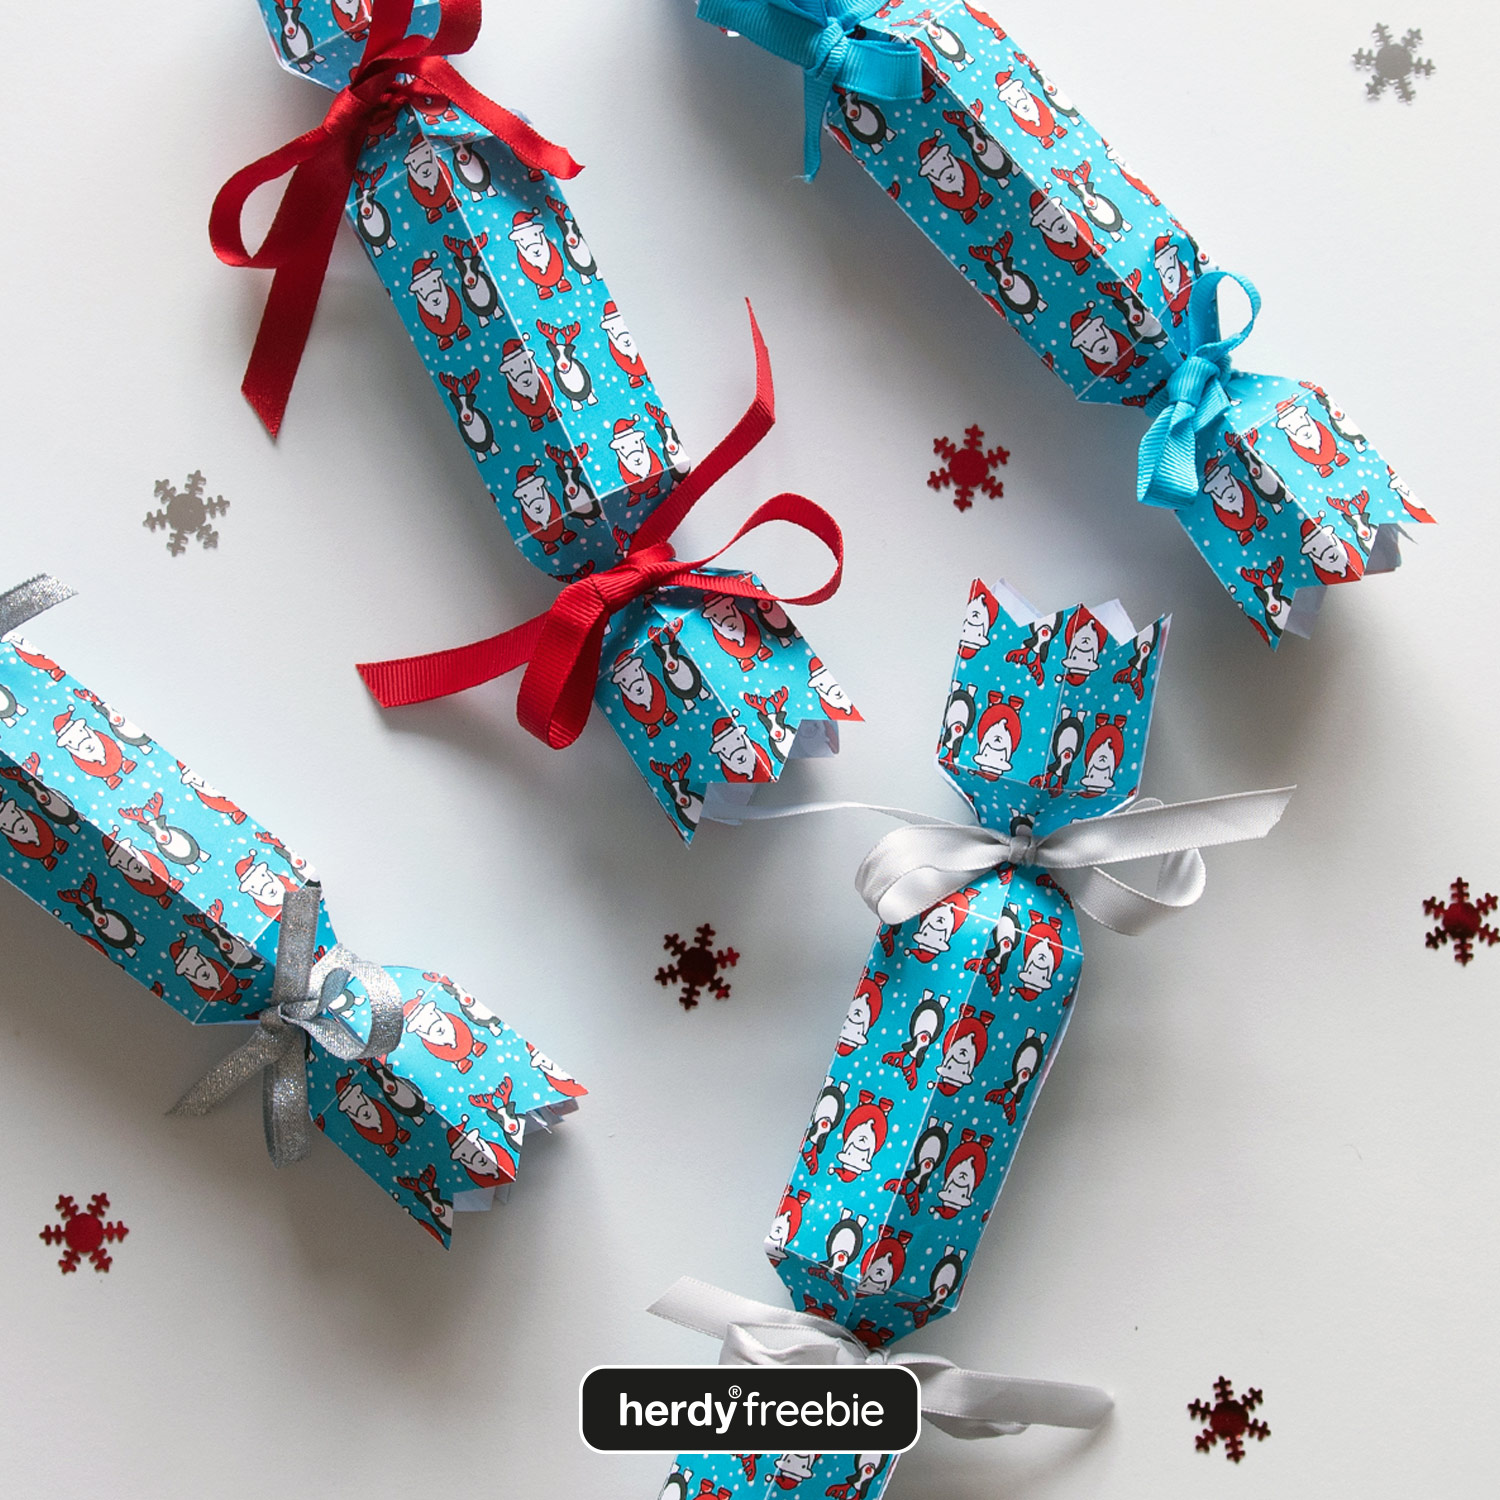 Herdy Christmas Crackers, free download